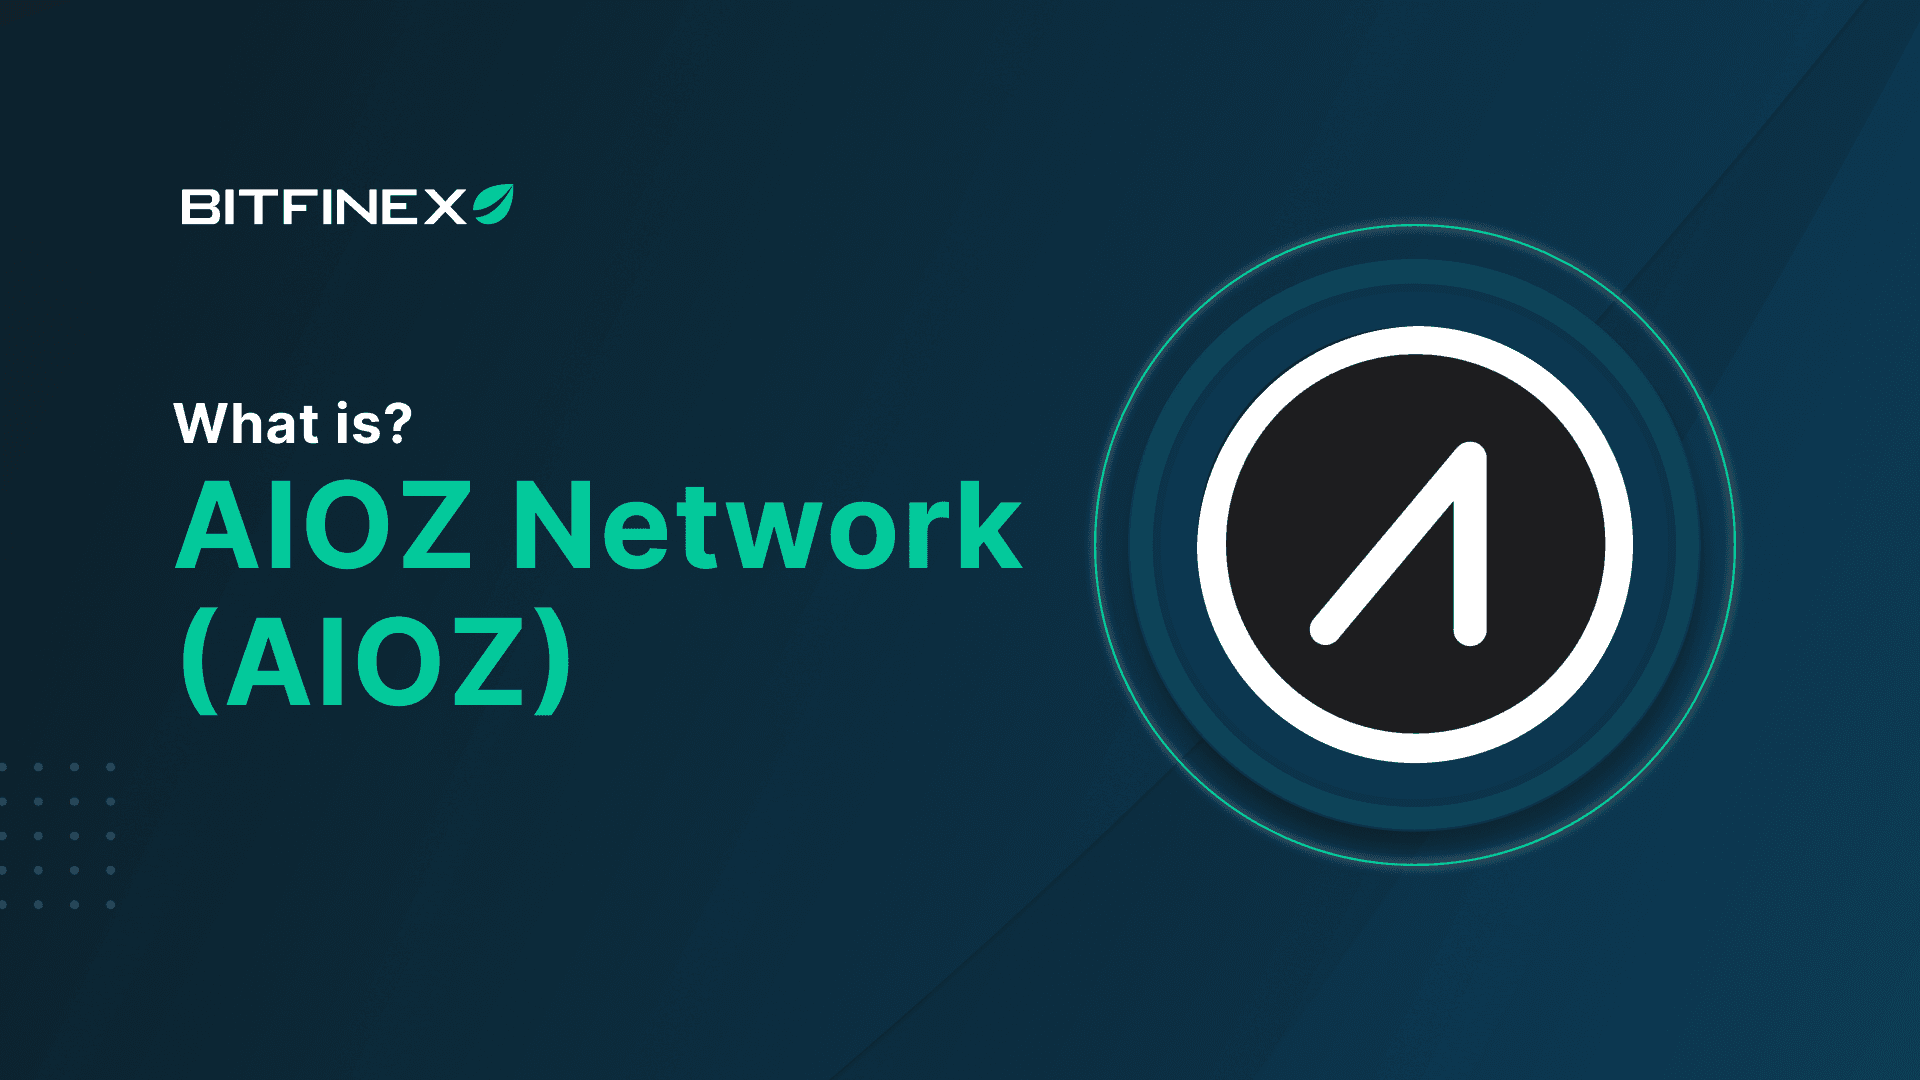 What is the AIOZ Network (AIOZ)?